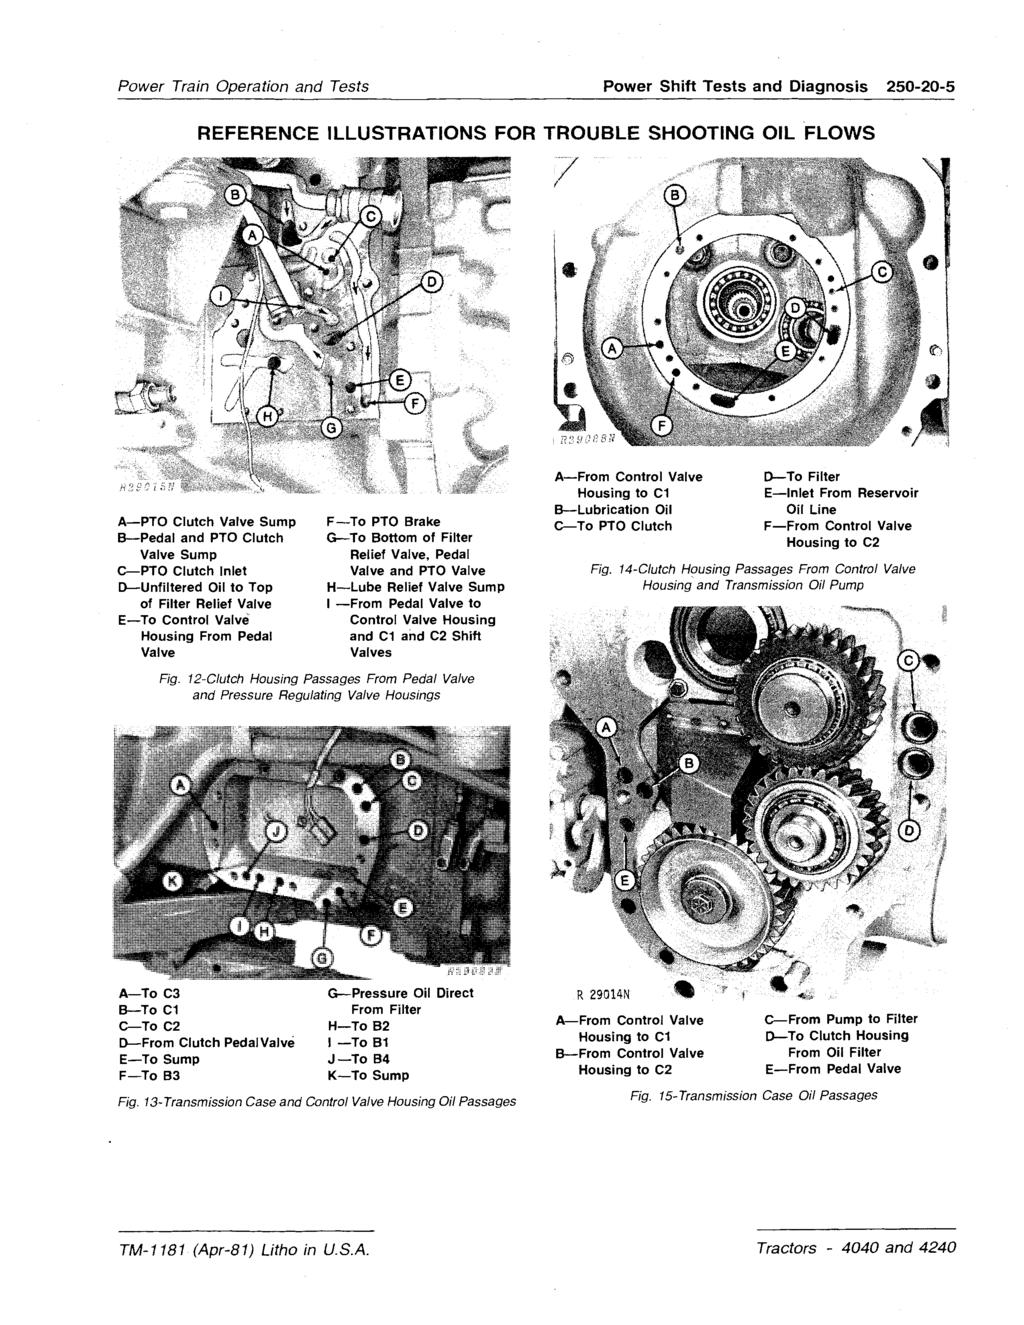 Power Train Operation and Tests Power Shift Tests and Diagnosis 250-20-5 REFERENCE ILLUSTRATIONS FOR TROUBLE SHOOTING OIL FLOWS A-PTO Clutch Valve Sump B-Pedal and PTO Clutch Valve Sump C-PTO Clutch